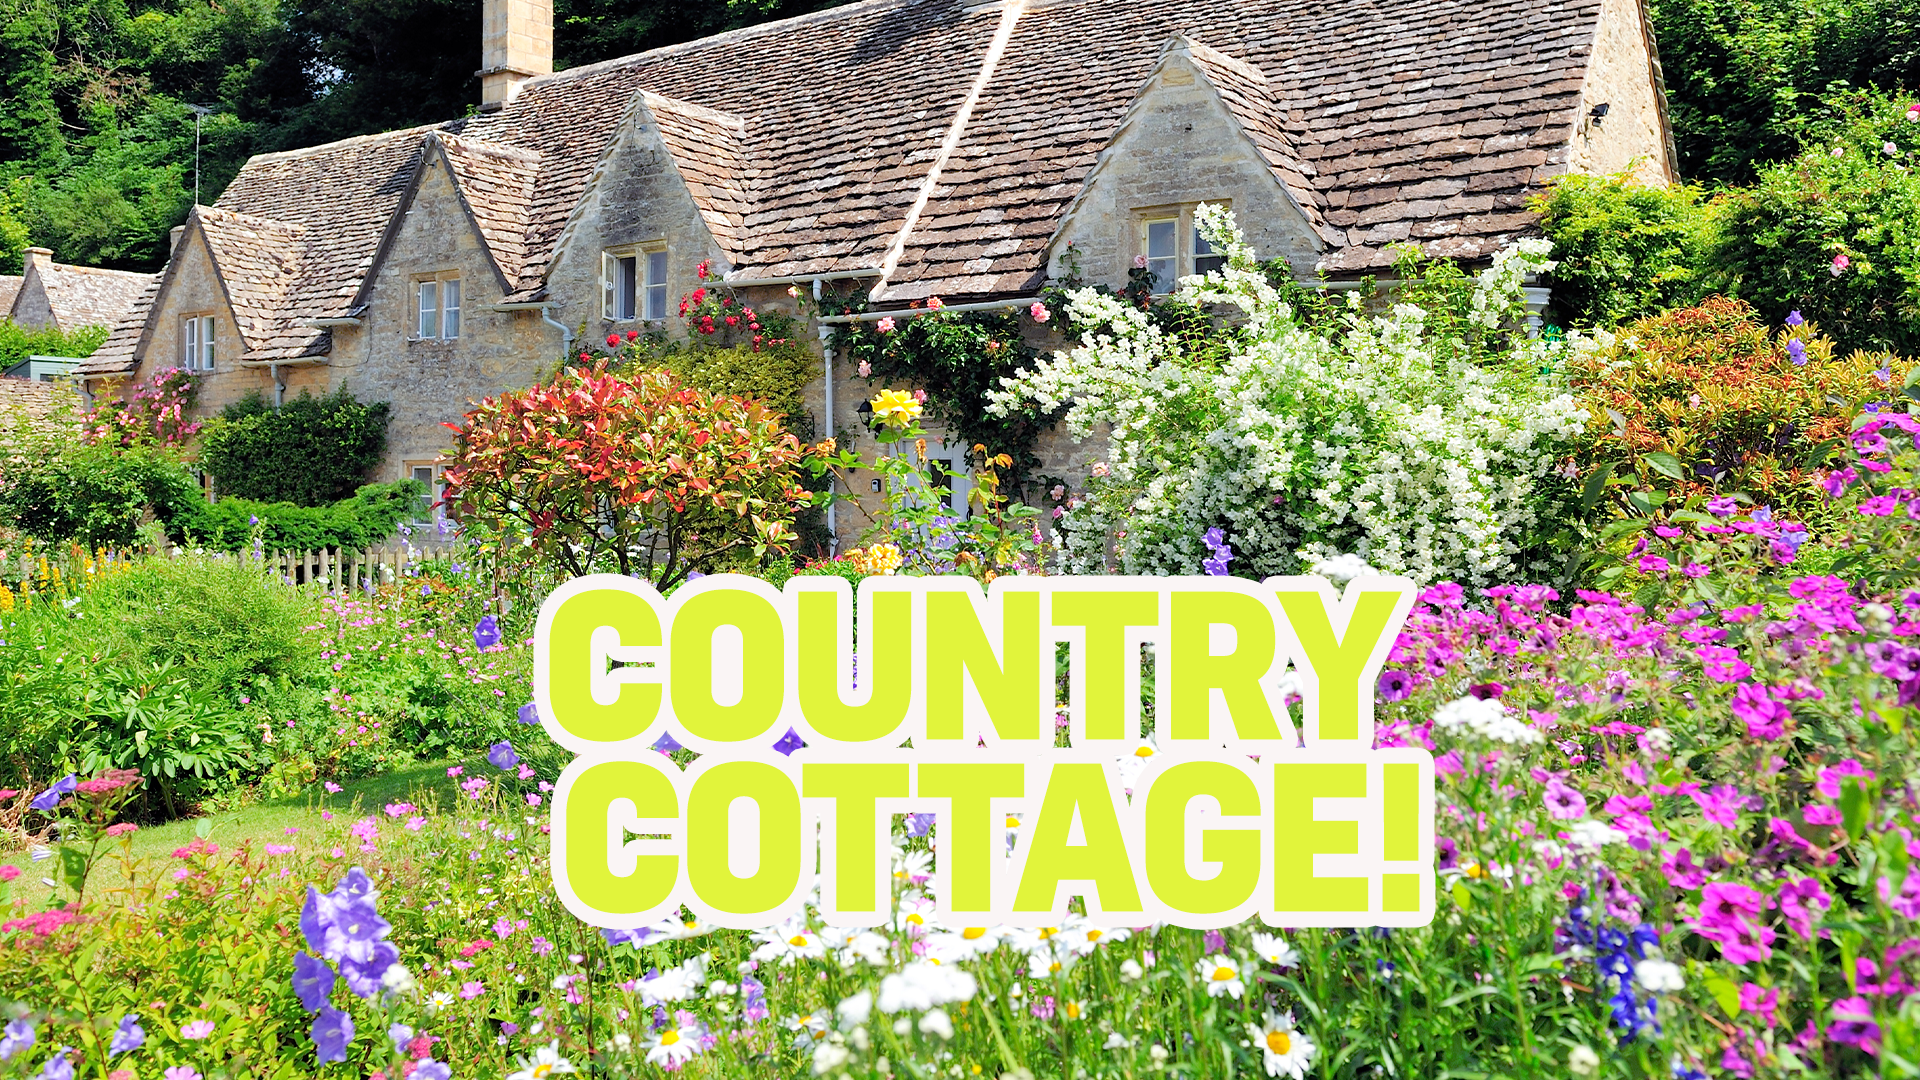 Result: Country cottage